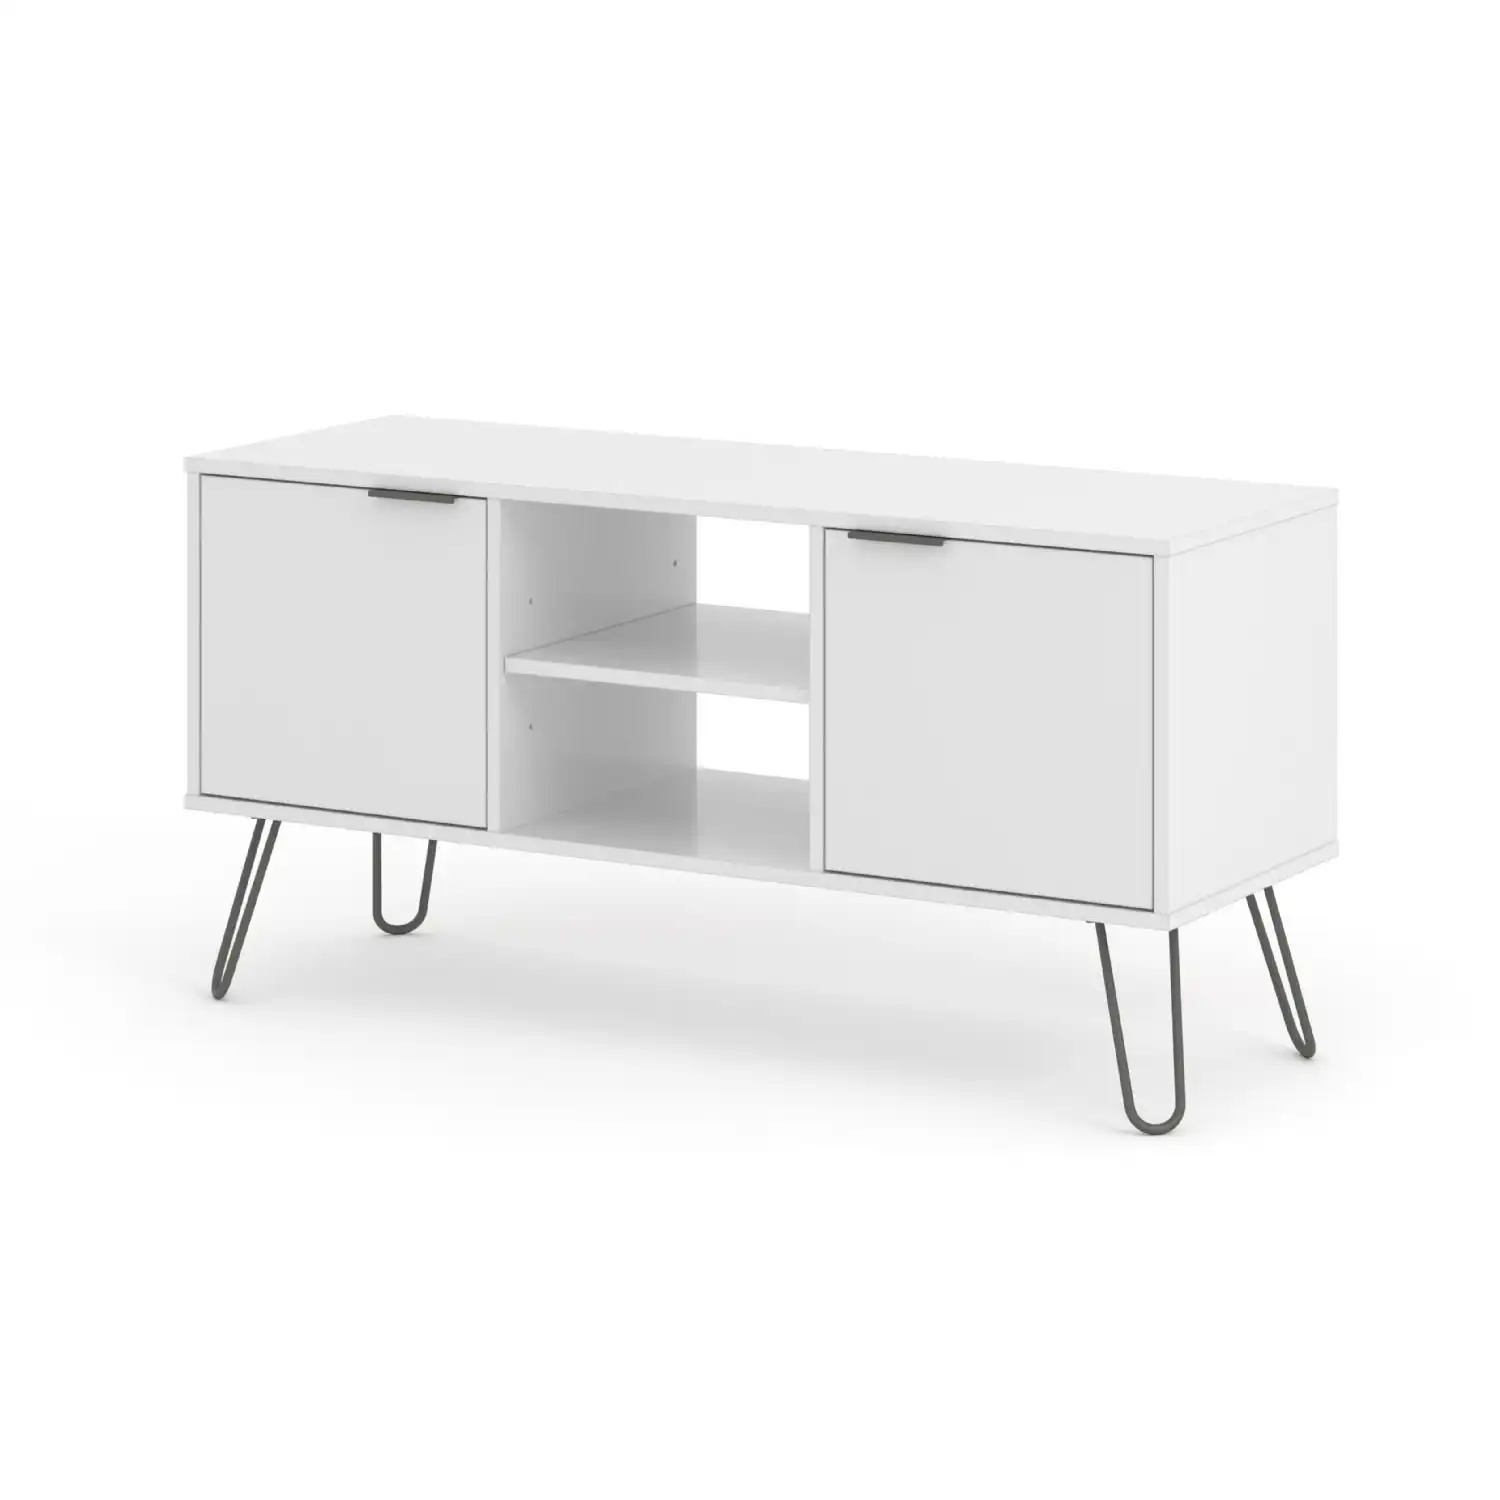 Modern Low Wide White 2 Door Flat Screen TV Unit With Pull Up Handles 57x114.5cm